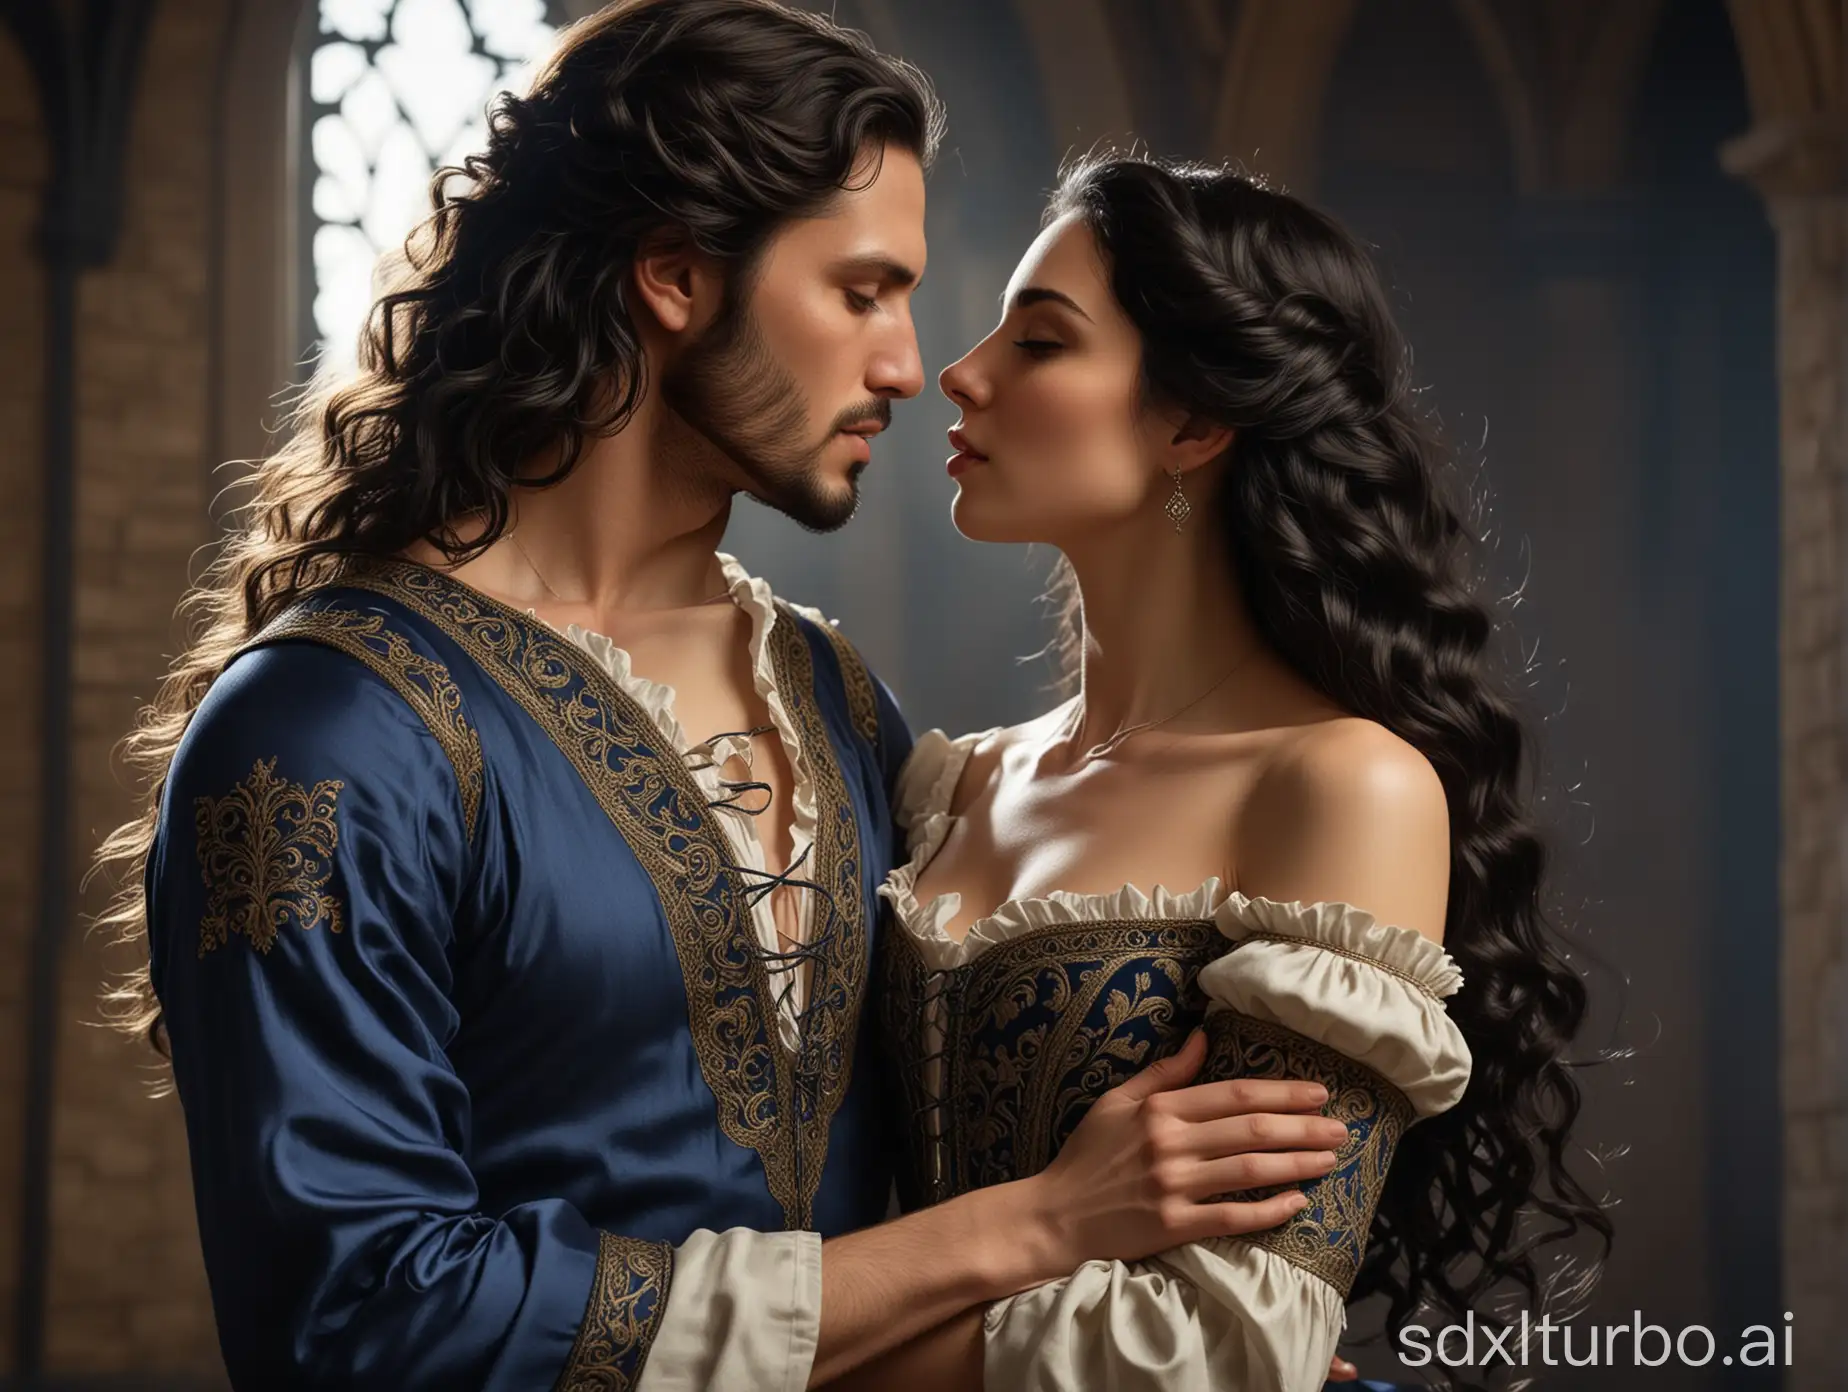 Medieval-Romance-Elegantly-Clad-Maiden-Extends-Hand-for-a-Kiss-to-Wealthy-Gentleman